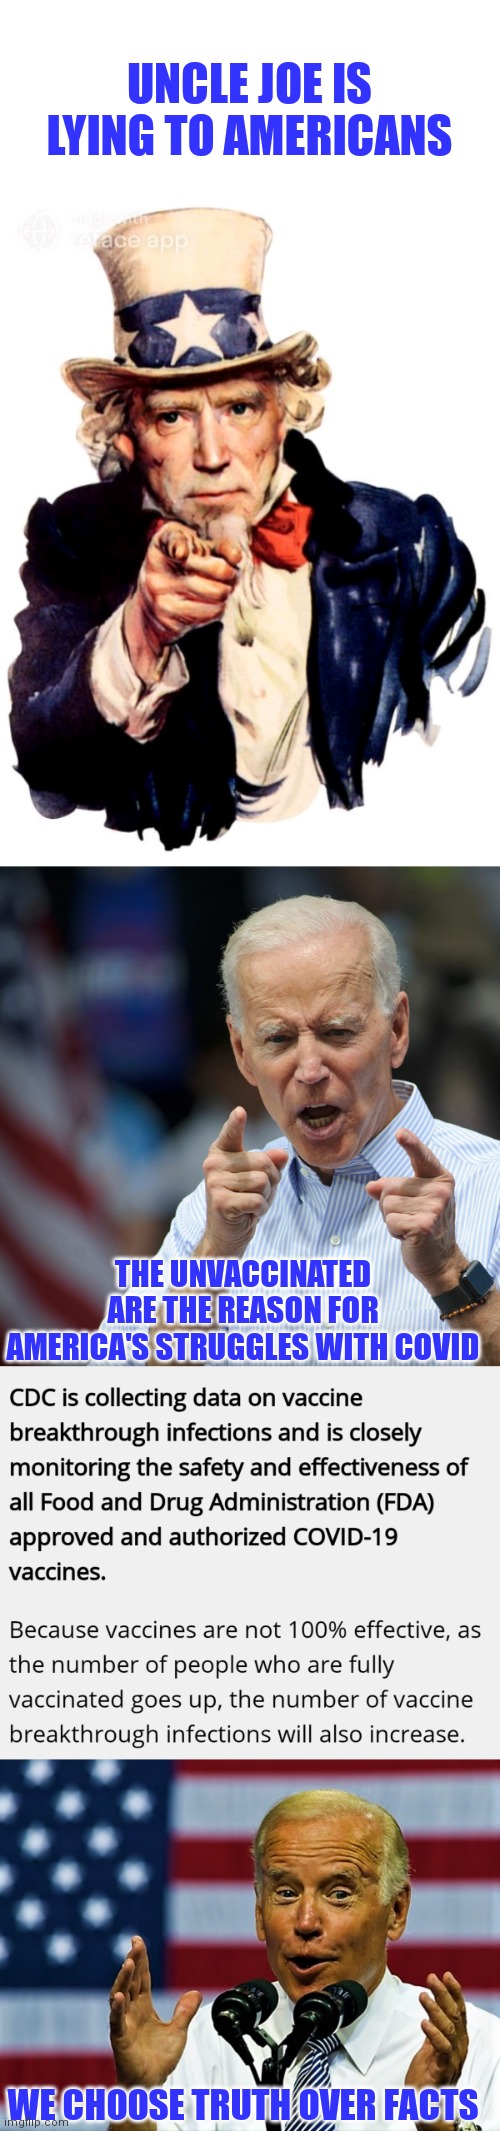 Dog faced pony soldier | UNCLE JOE IS LYING TO AMERICANS; THE UNVACCINATED ARE THE REASON FOR AMERICA'S STRUGGLES WITH COVID; WE CHOOSE TRUTH OVER FACTS | image tagged in joe biden,comprehending joey,liar liar pants on fire | made w/ Imgflip meme maker